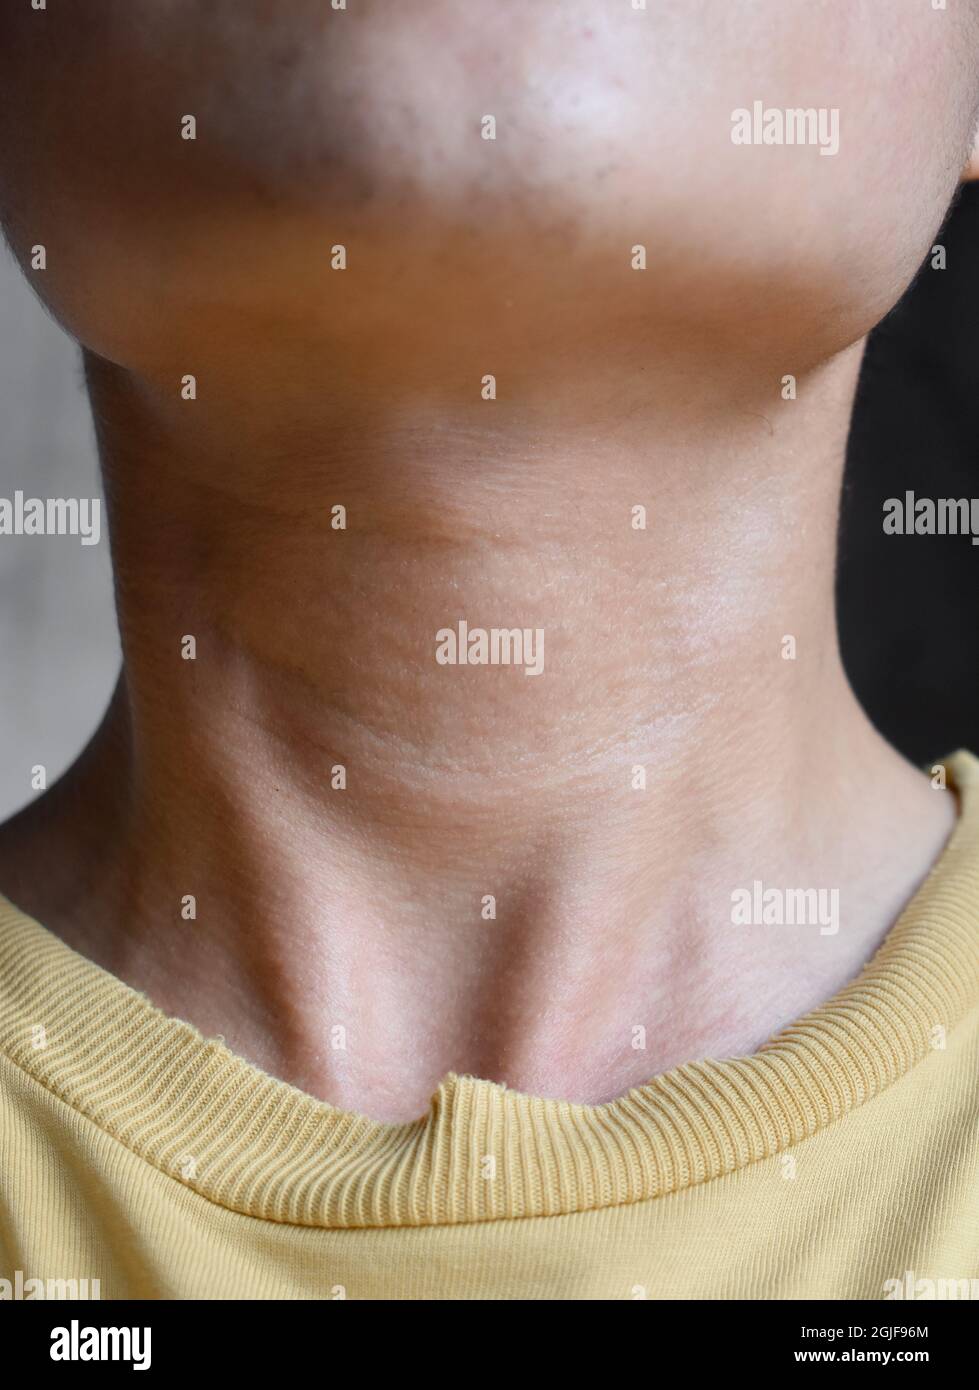 Neck swelling diagnosed as hyperthyroidism. Aging skin folds or skin creases or wrinkles at neck of Asian, Chinese young man. Front view. Stock Photo